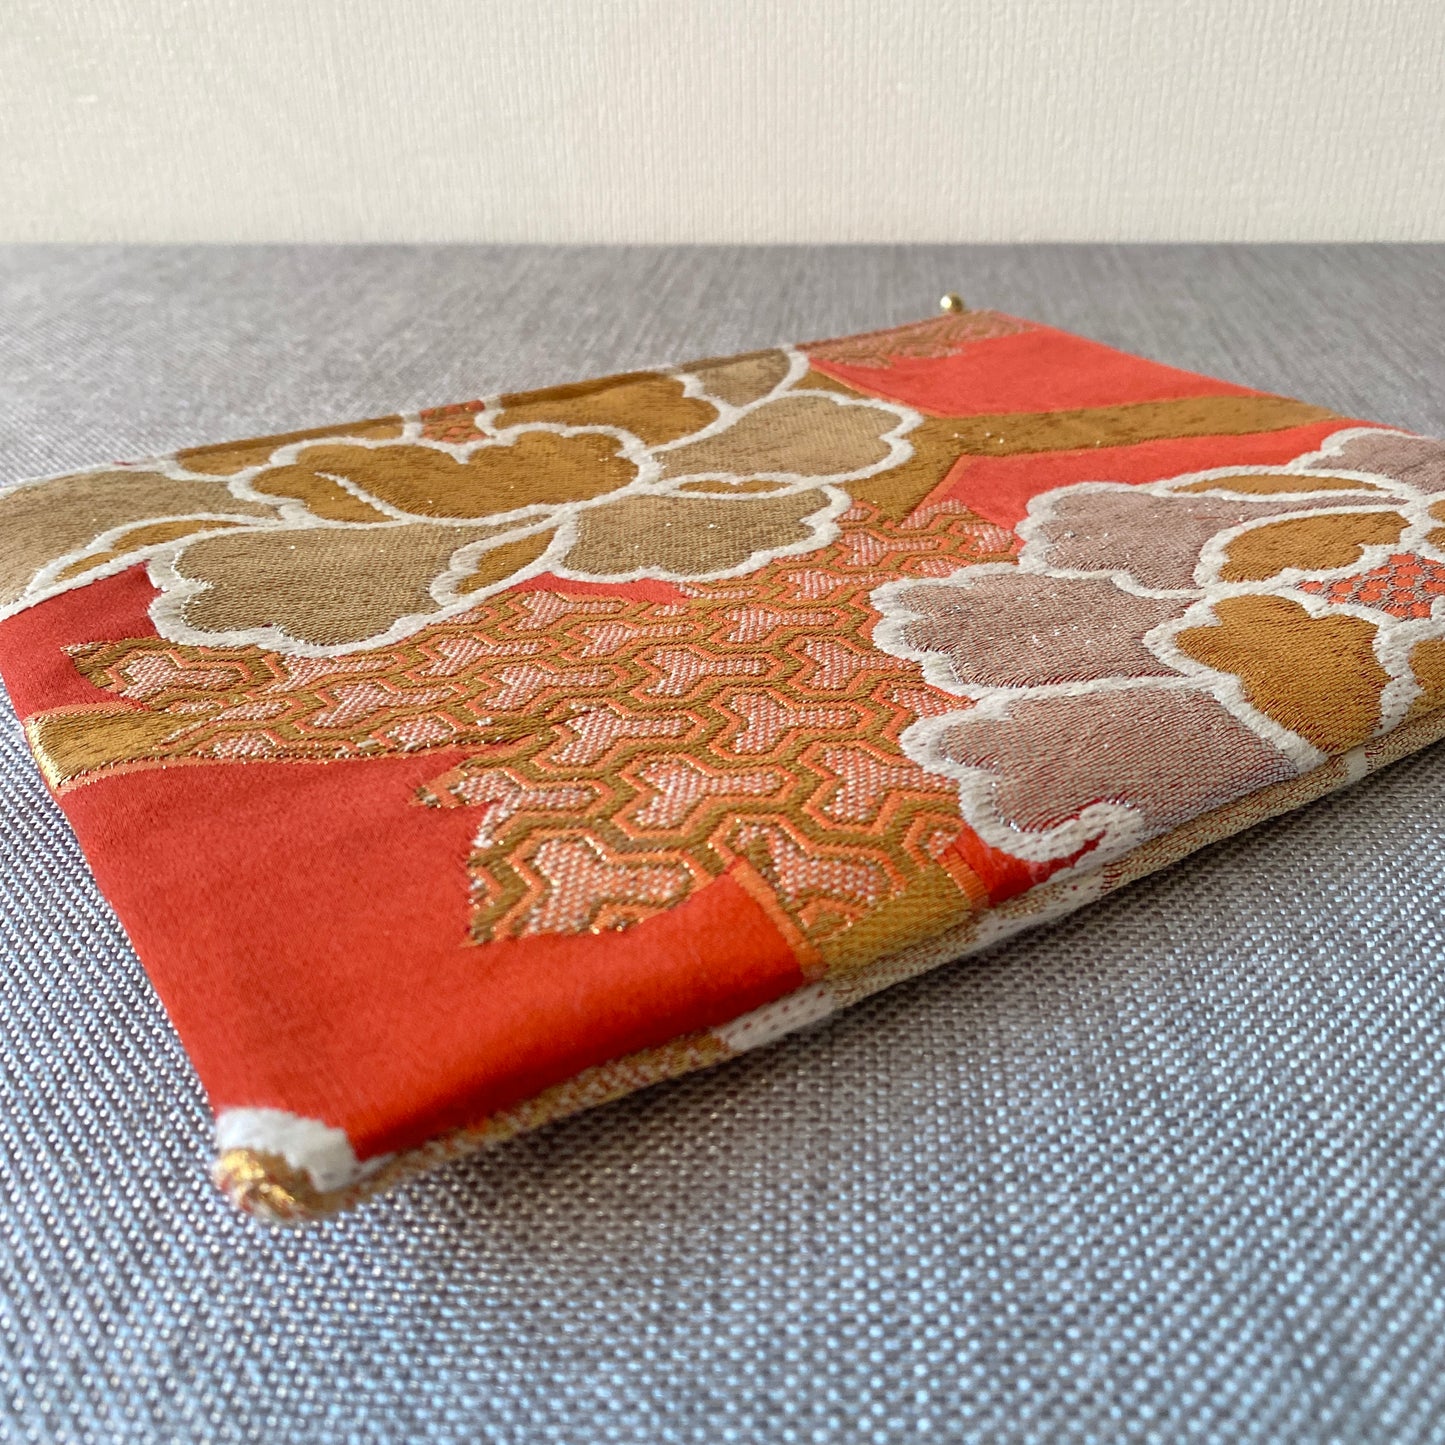 Flat silk Obi pouch, Medium size, Handcrafted, Upcycled, #3004